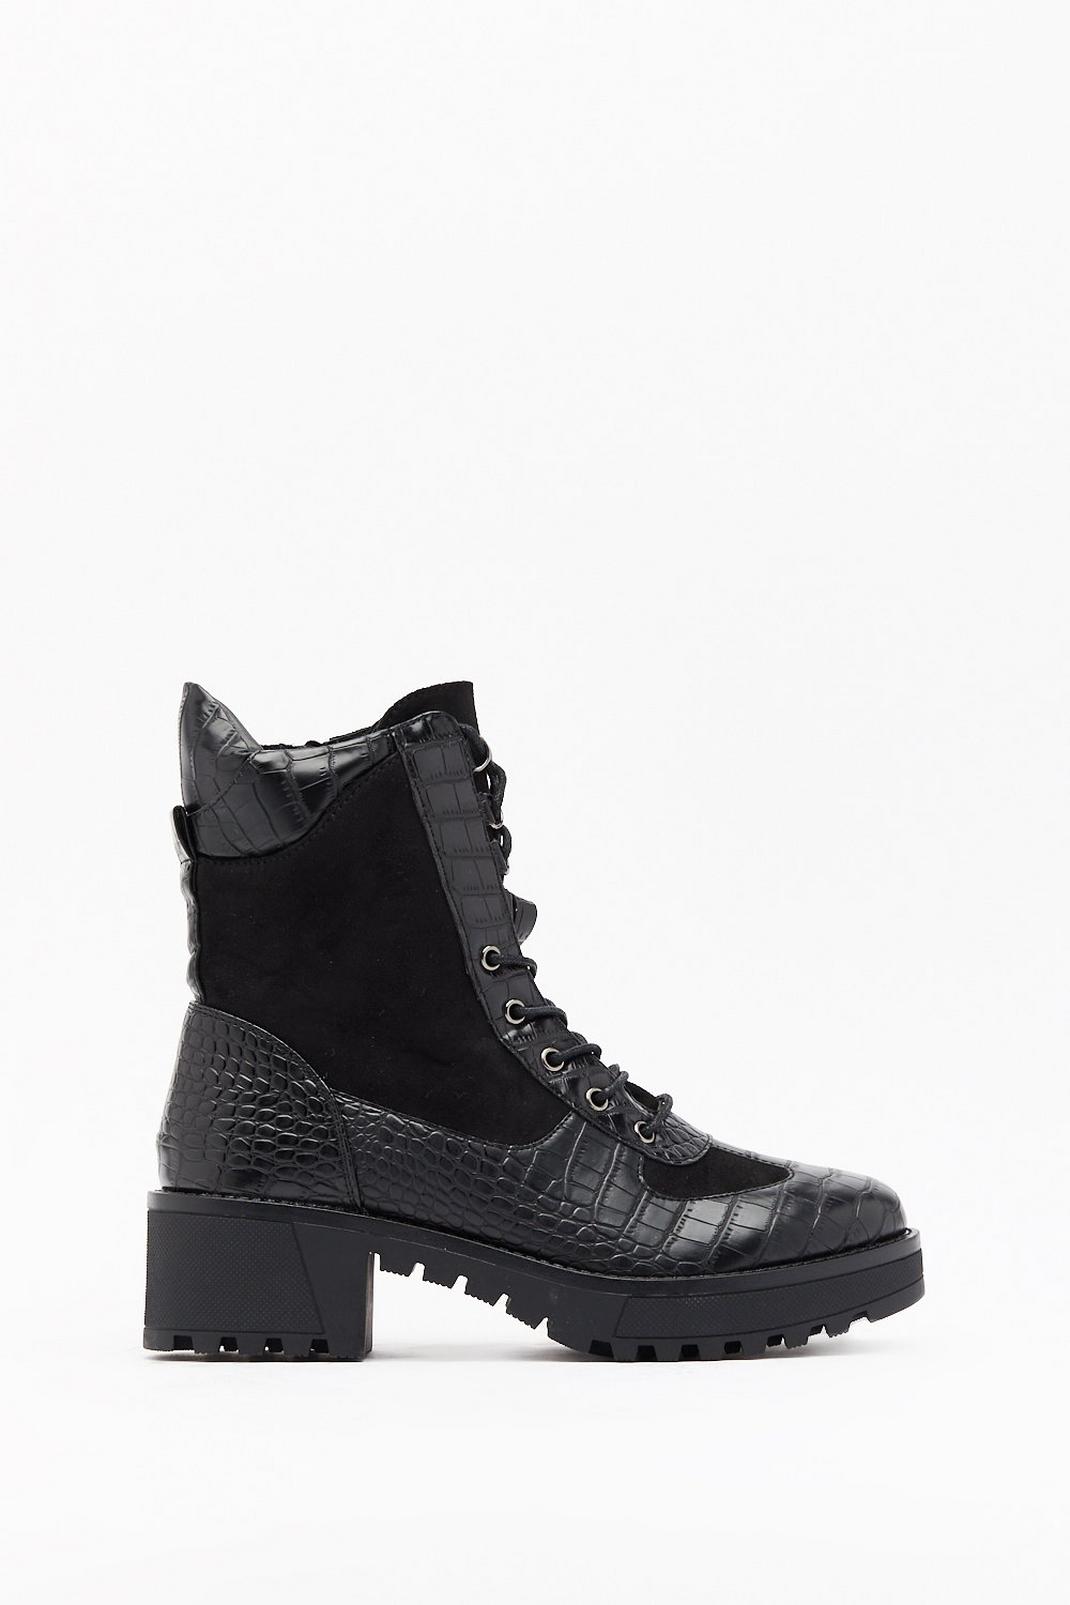 Croc You Want Faux Leather Hiker Boots image number 1